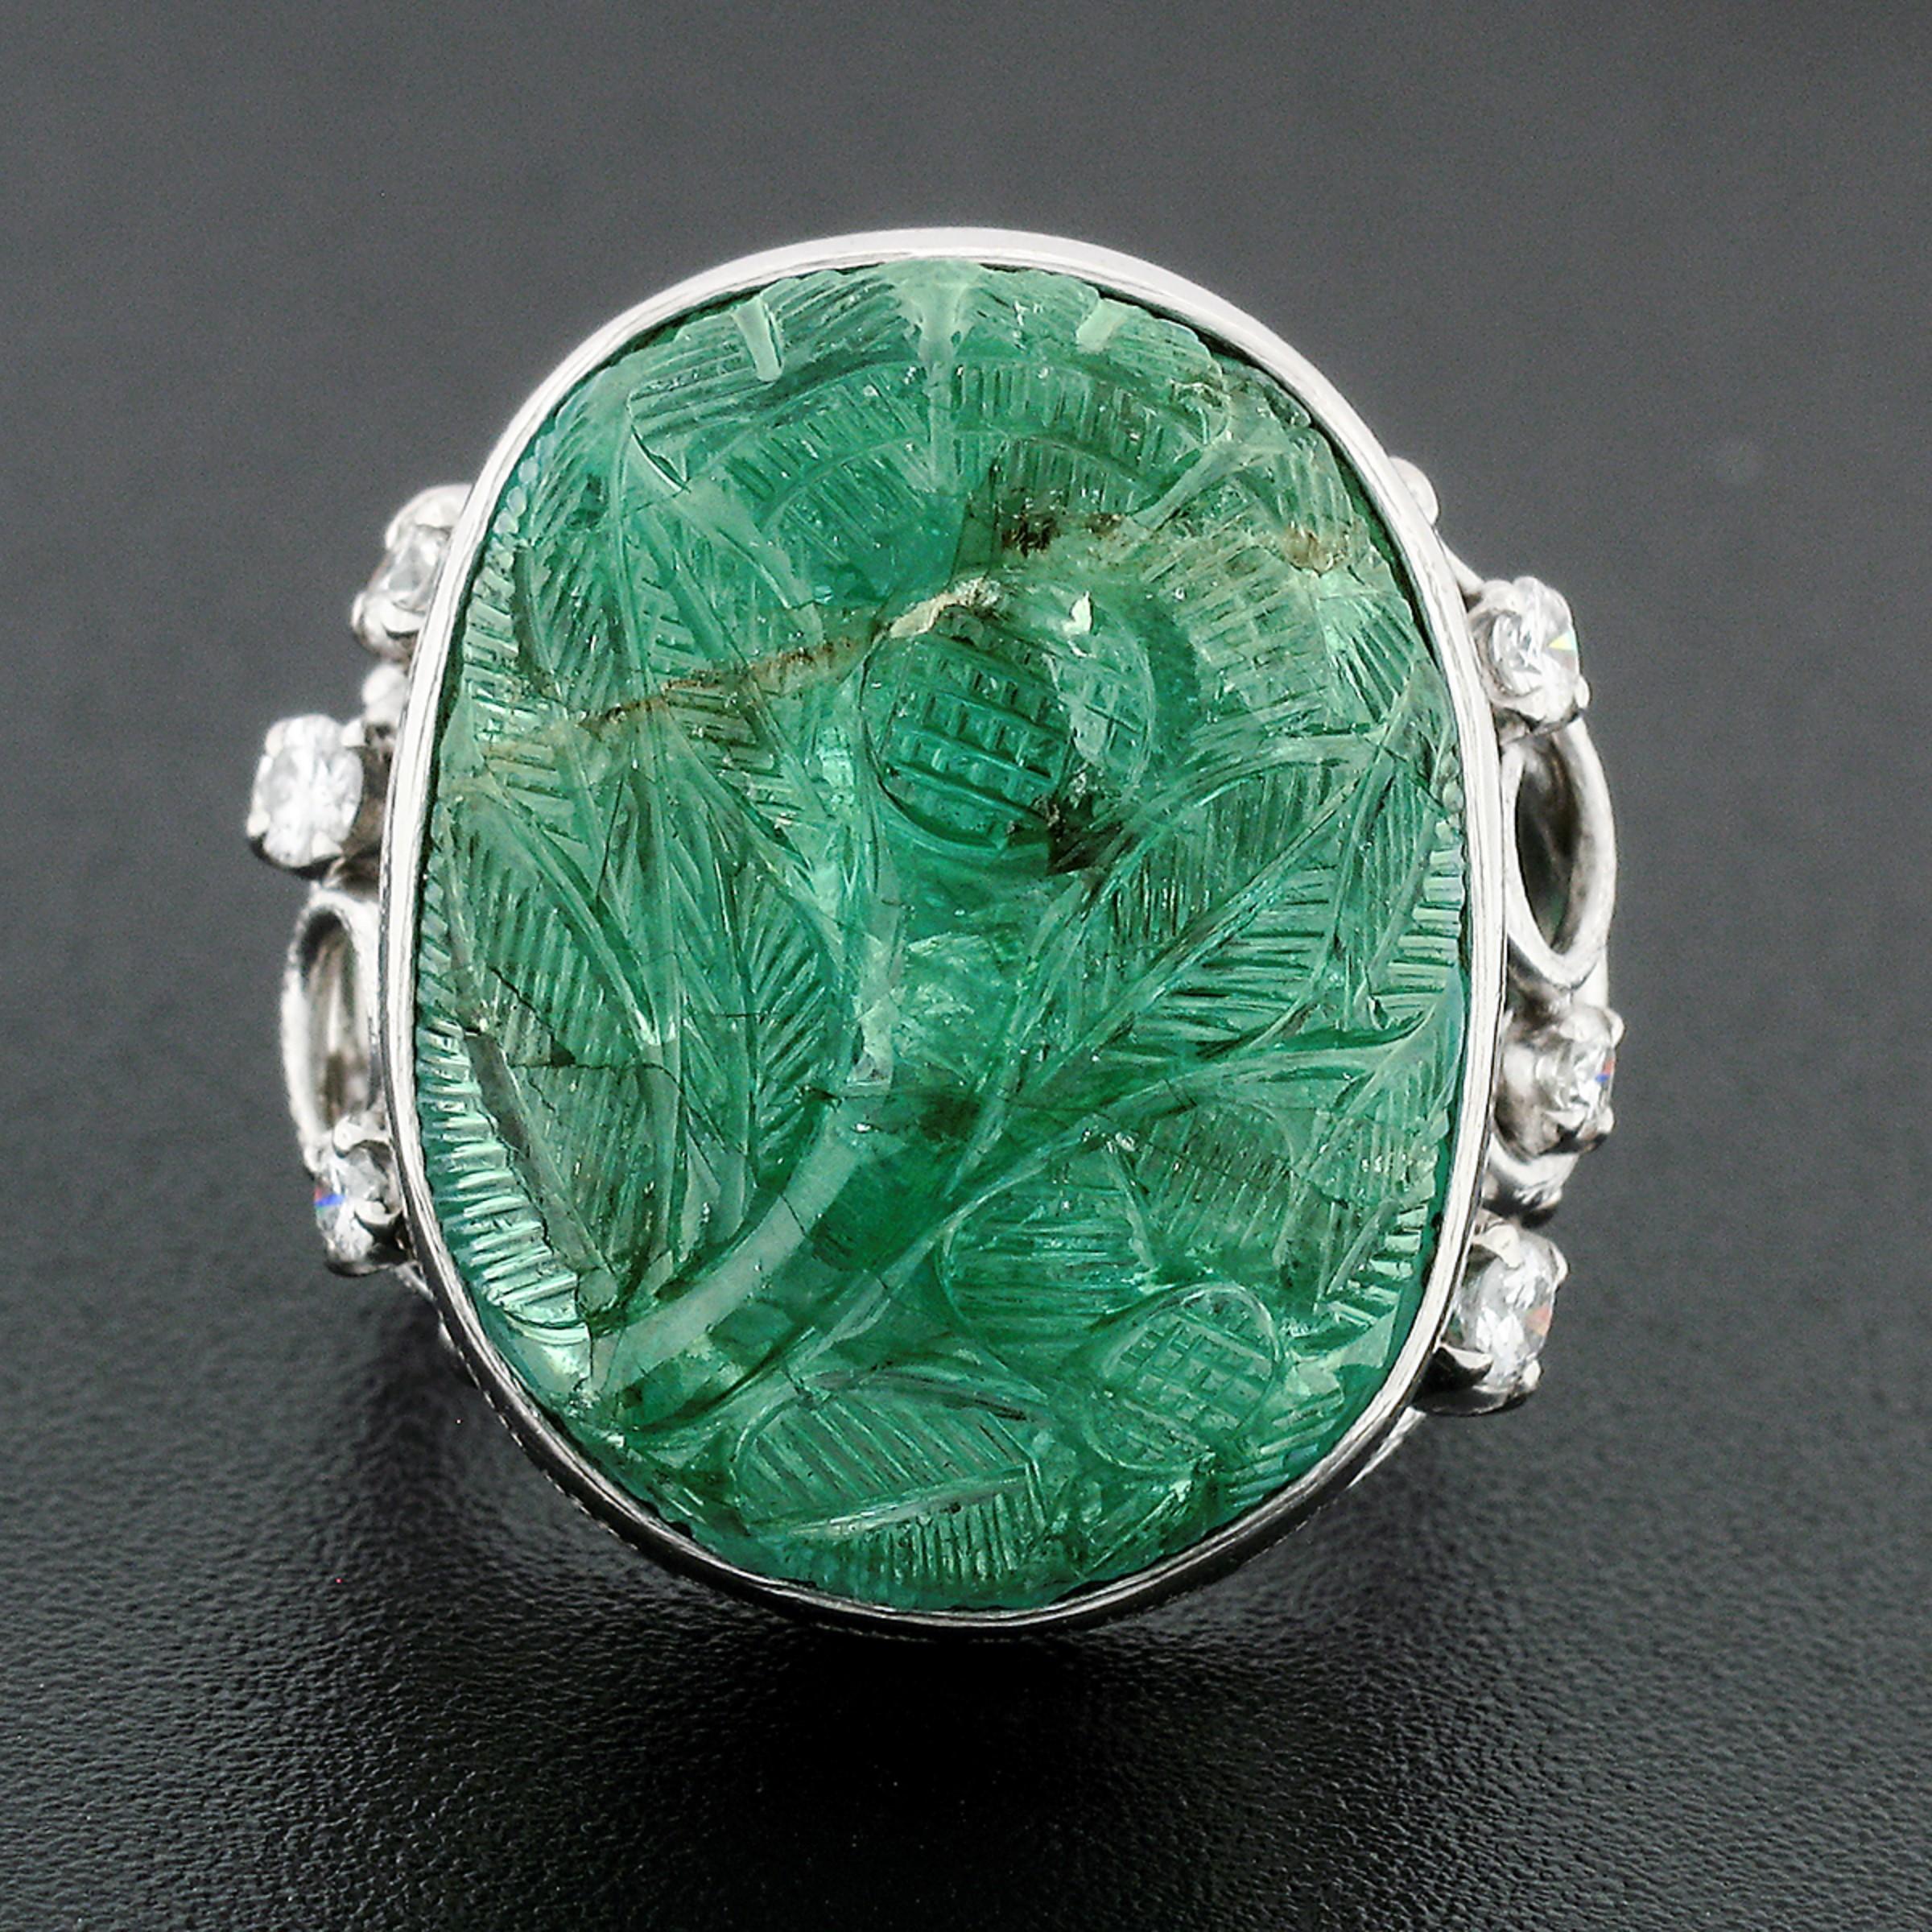 This truly gorgeous, vintage, GIA certified emerald and round diamond statement ring was crafted from solid .900 platinum. The ring features a breathtaking, natural, oval cut emerald that displays a rich medium green color and a magnificently